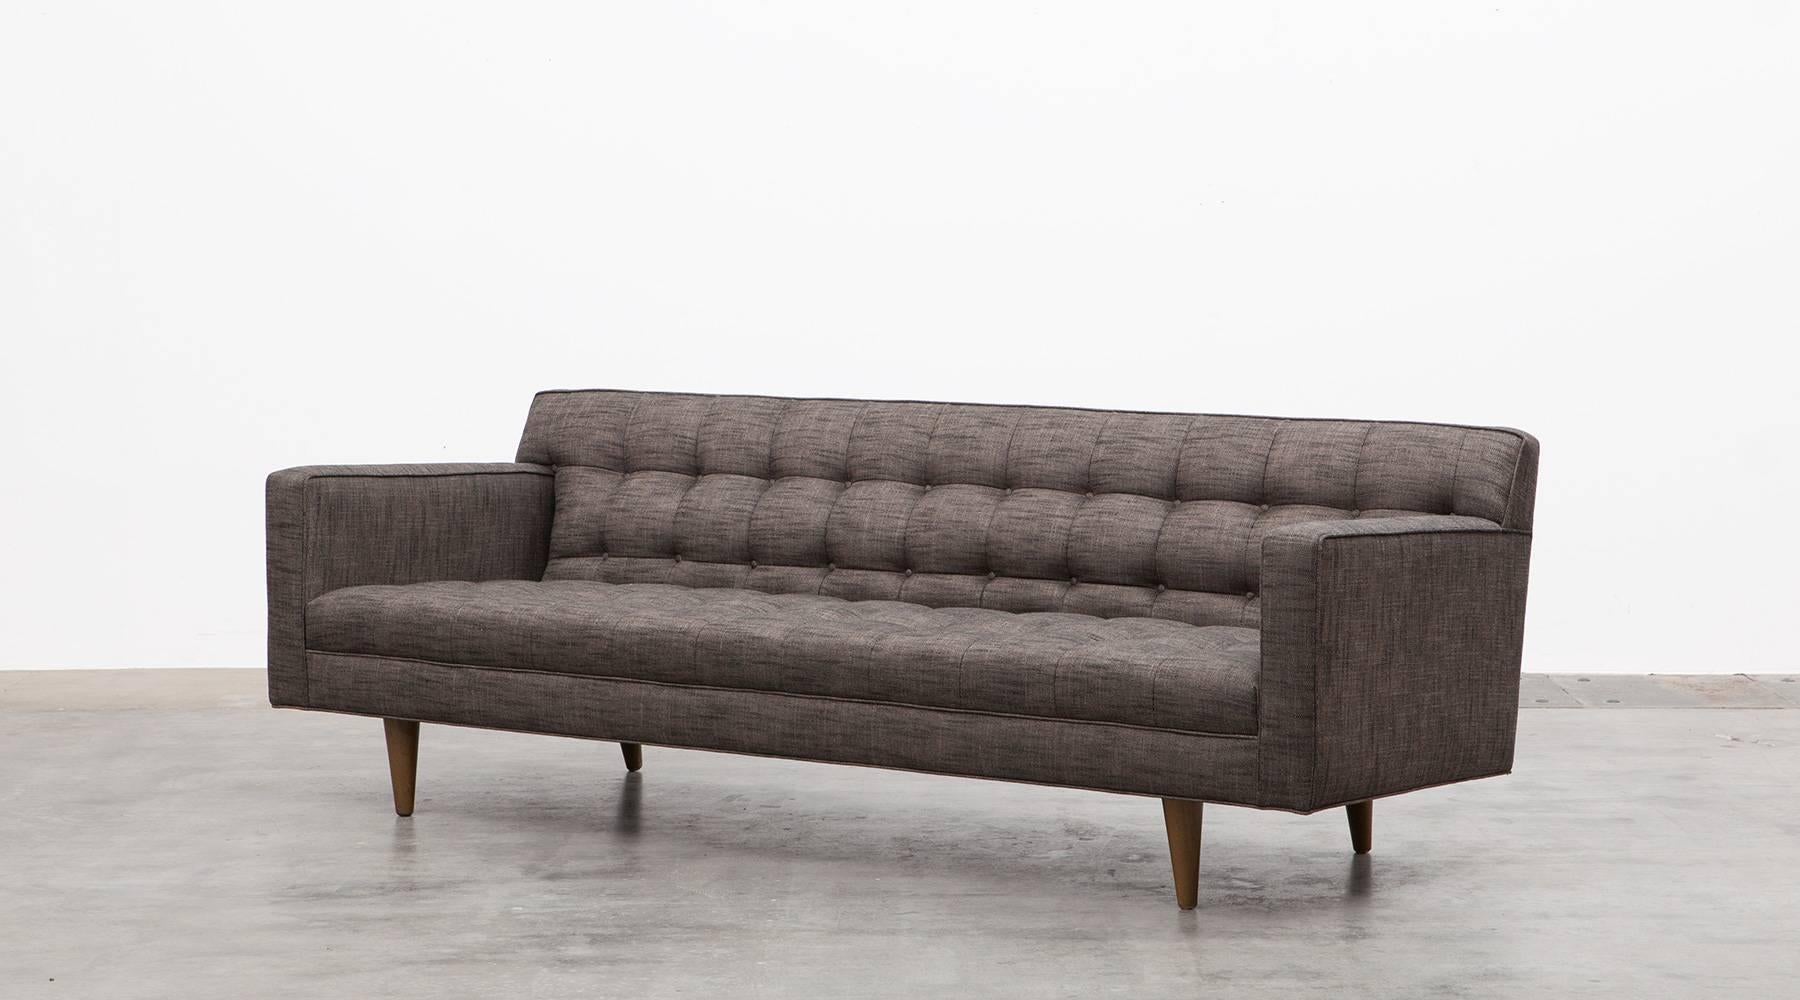 This classical three-seat sofa is designed by famous Edward Wormley. It is newly upholstered with high-quality fabric and stands on wooden feet. It’s simple but stunning design makes this sofa to a very unique and special item and promises a very